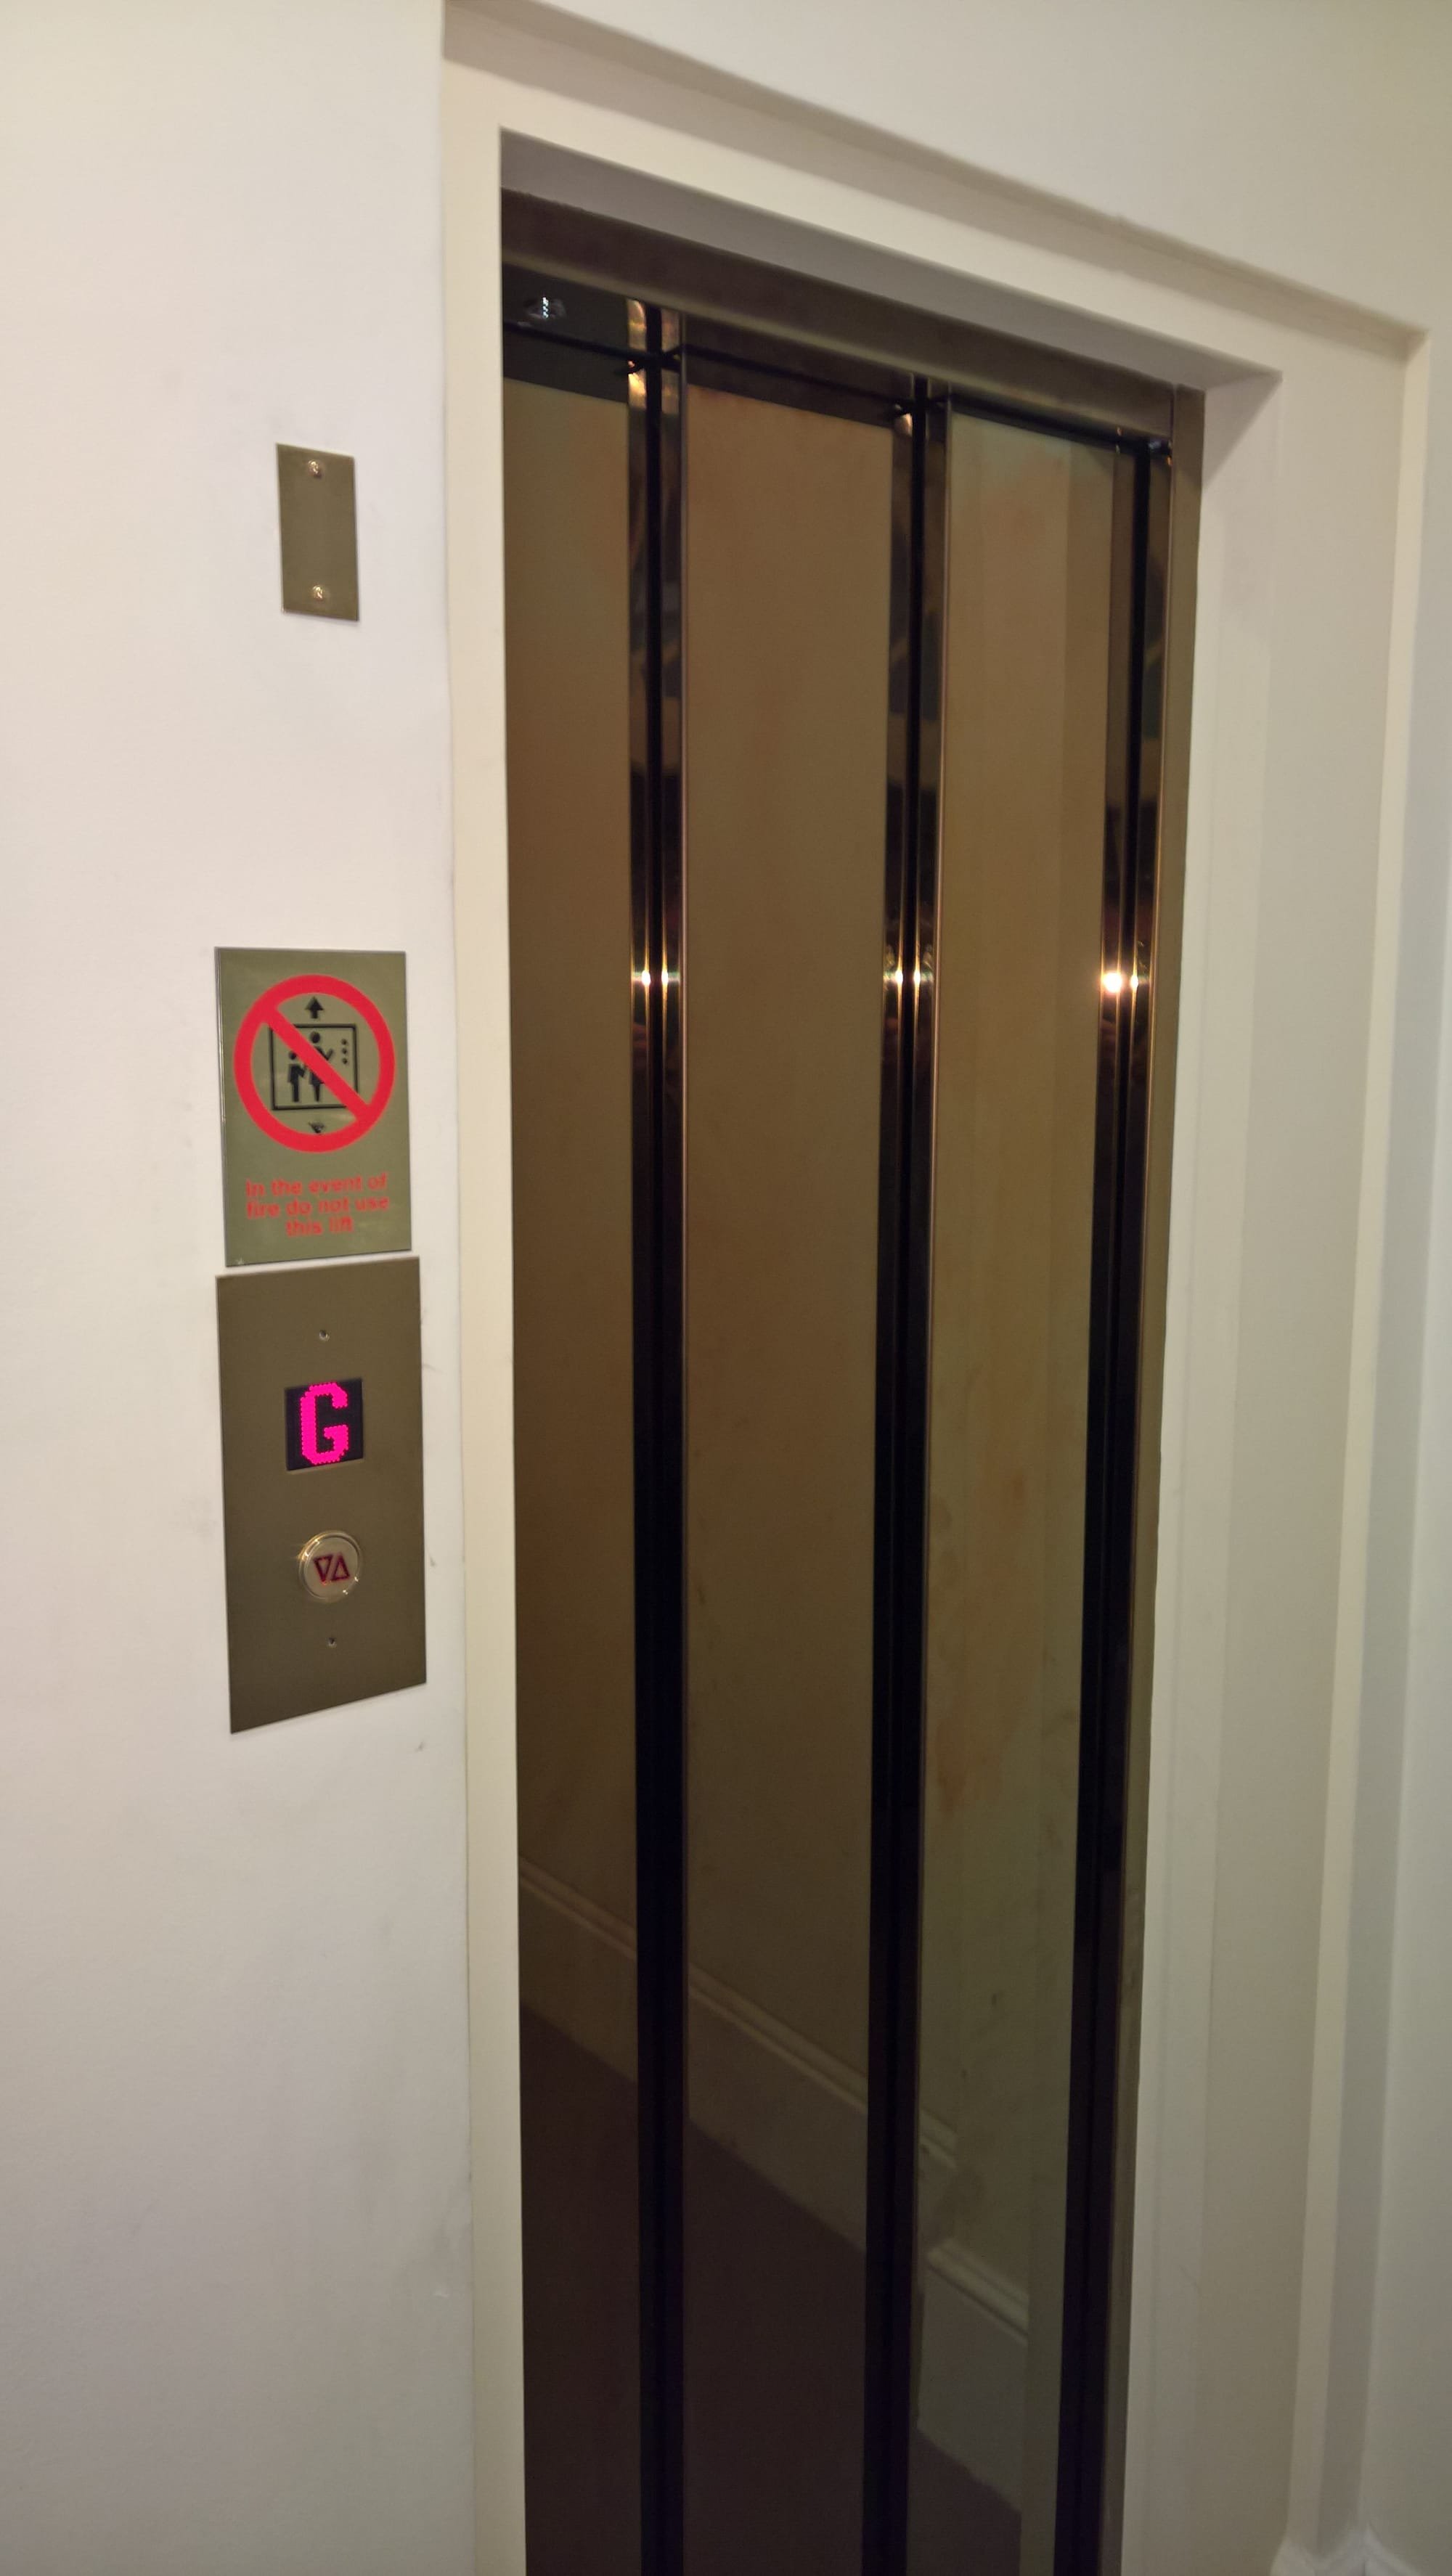 After - automatic door